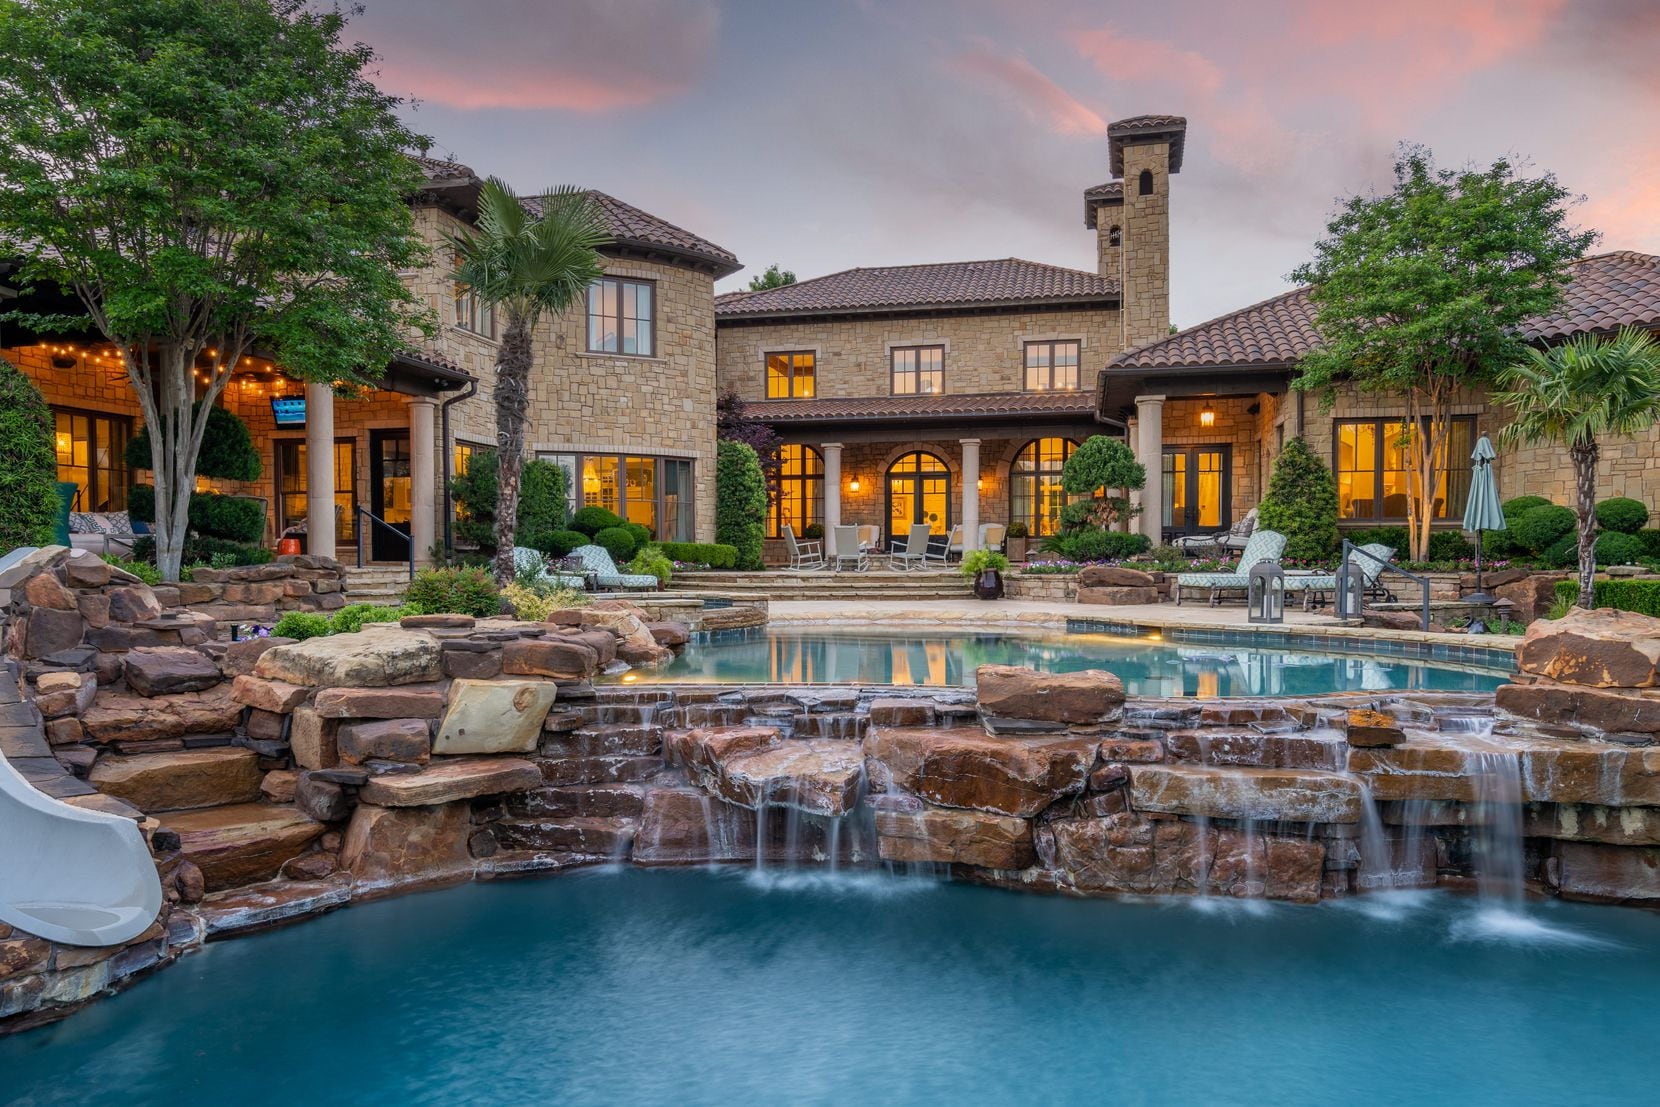 Former Dallas Cowboys star Jason Witten is selling his mansion in Westlake's Vaquero...